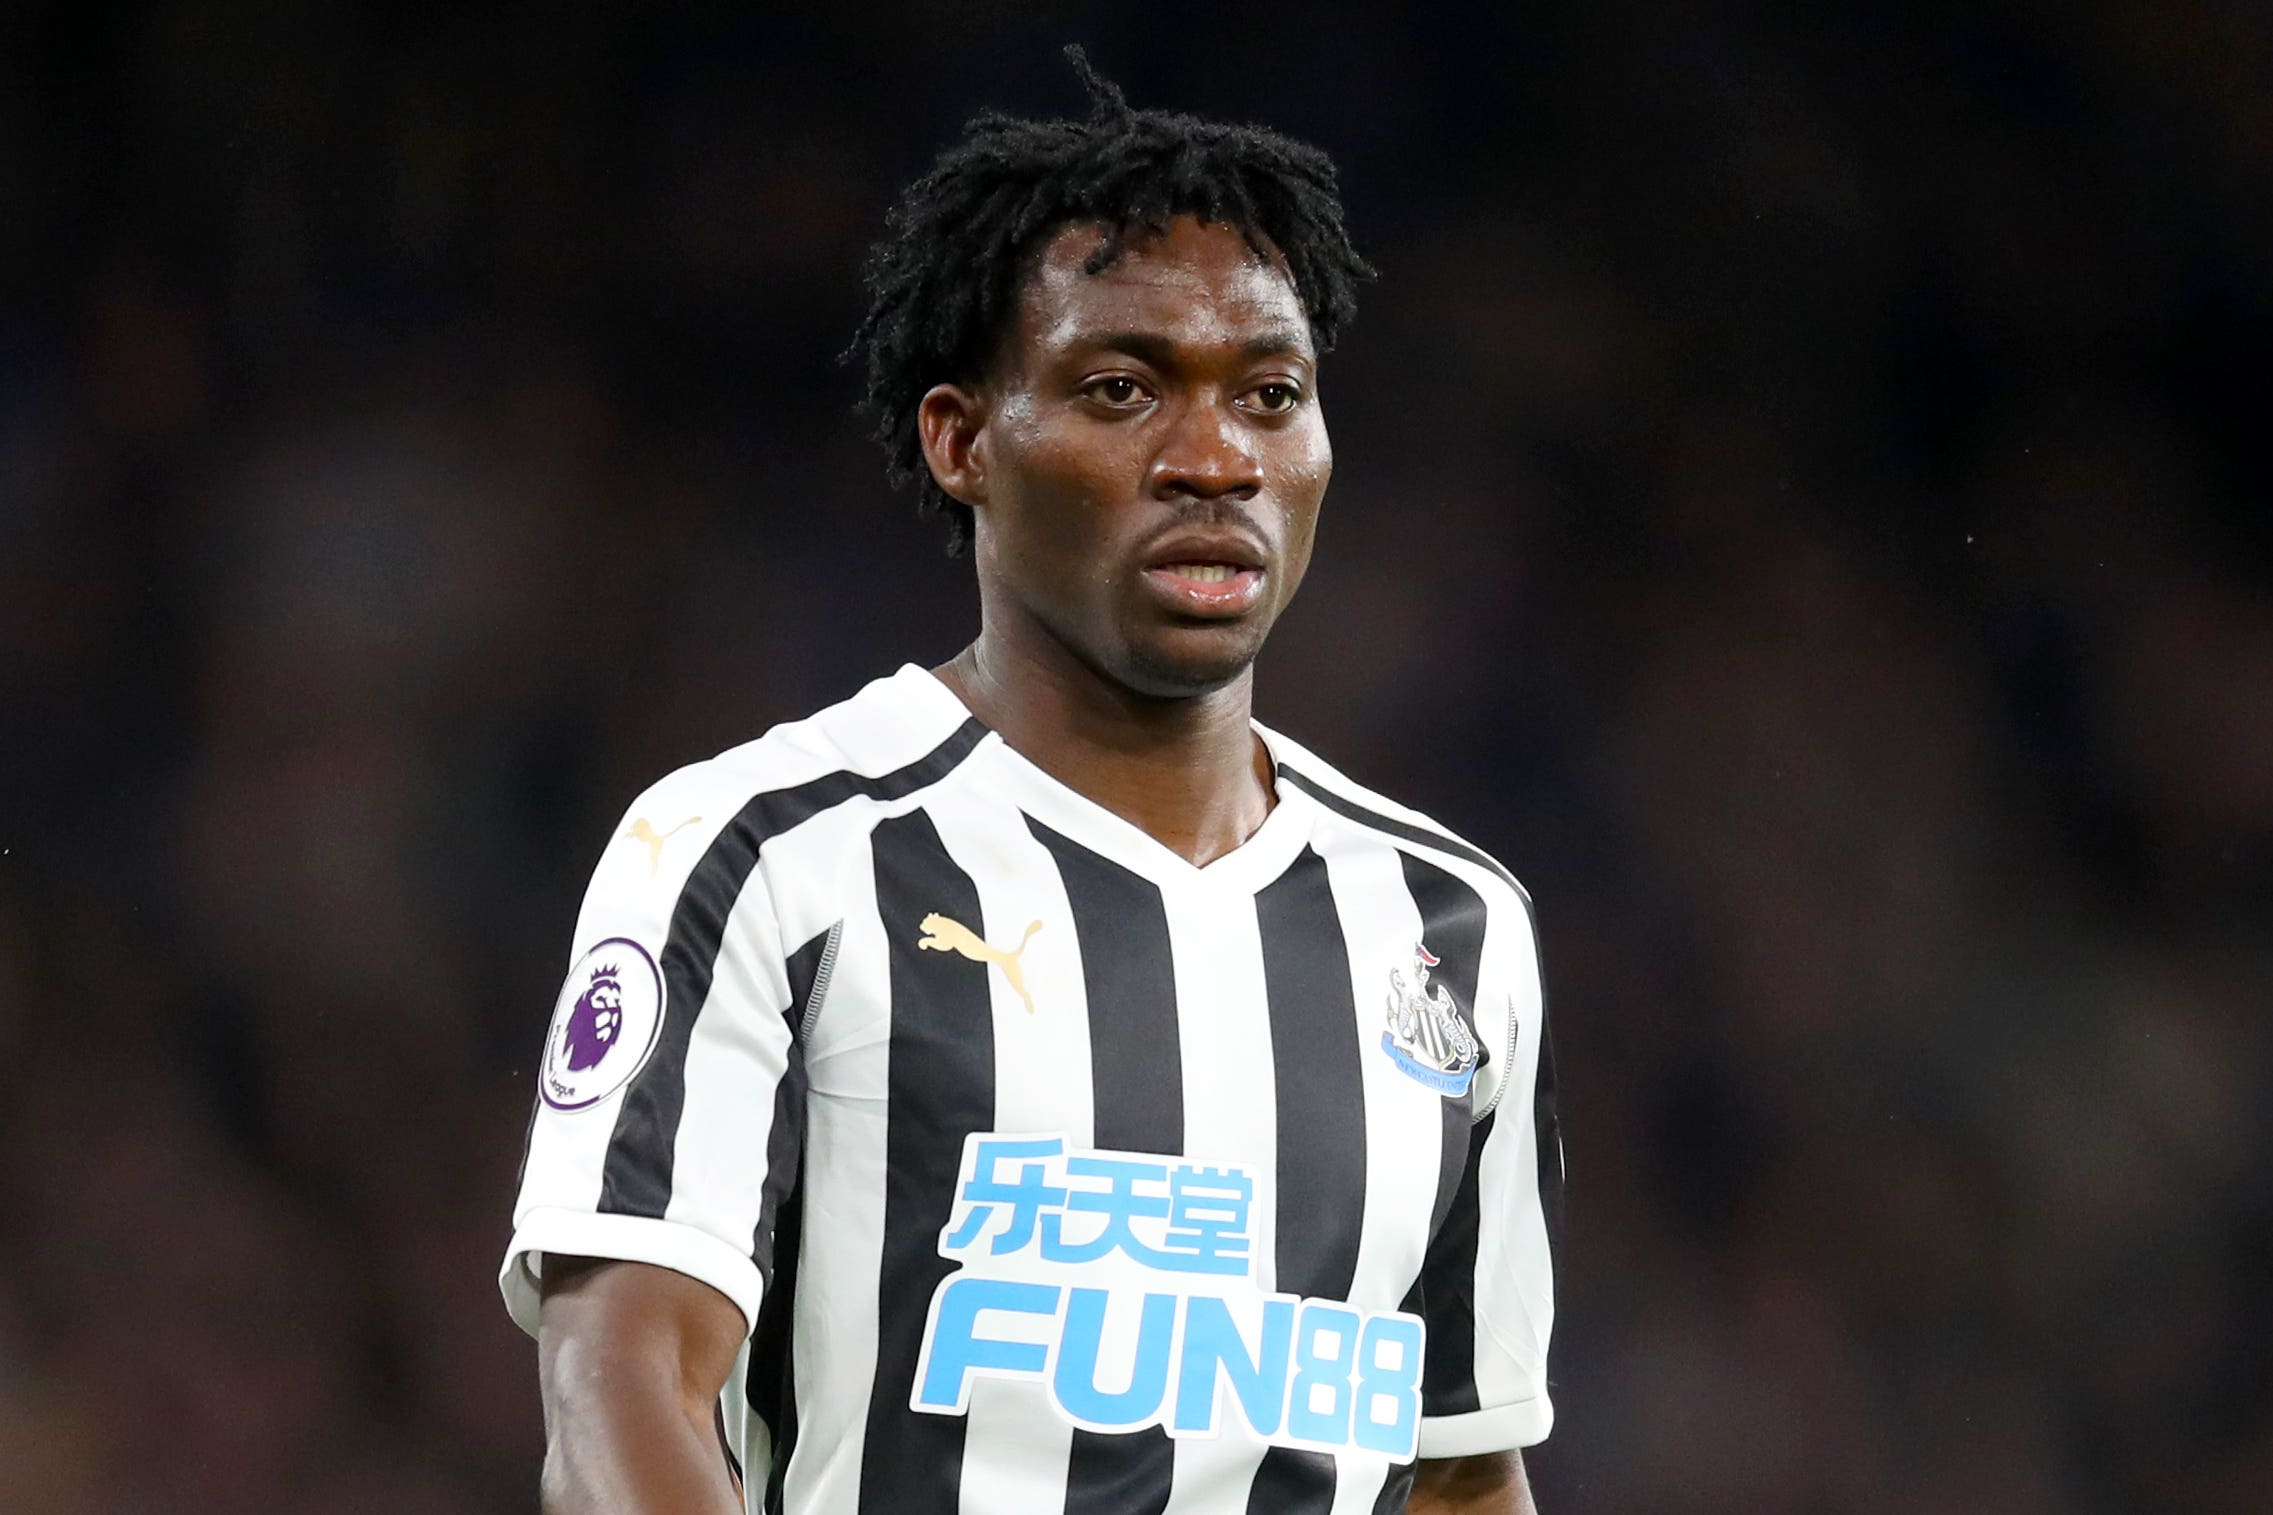 Atsu is a former Newcastle and Chelsea midfielder